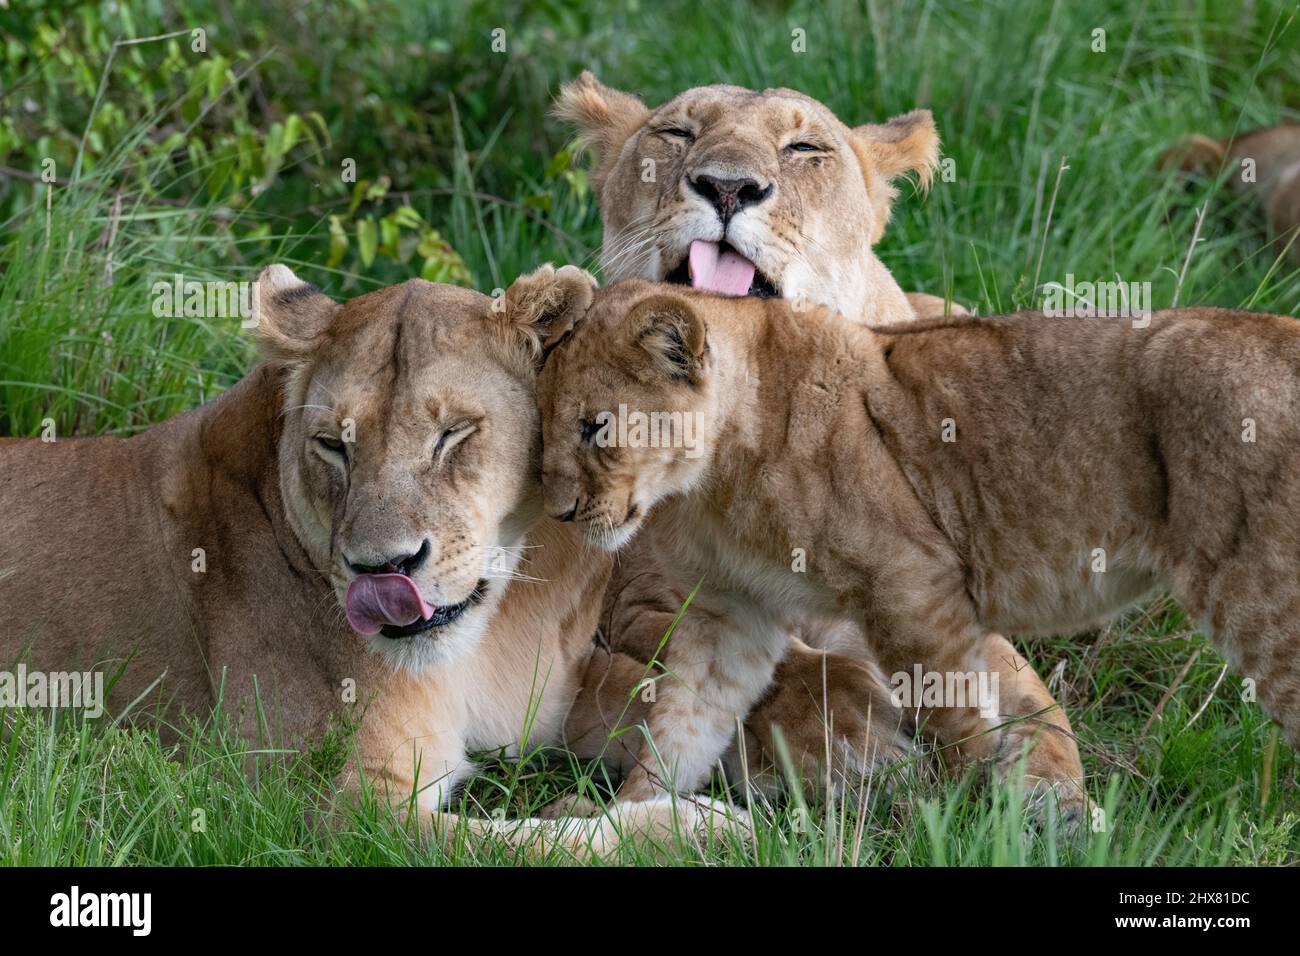 lionesses and cub bonding together Stock Photo